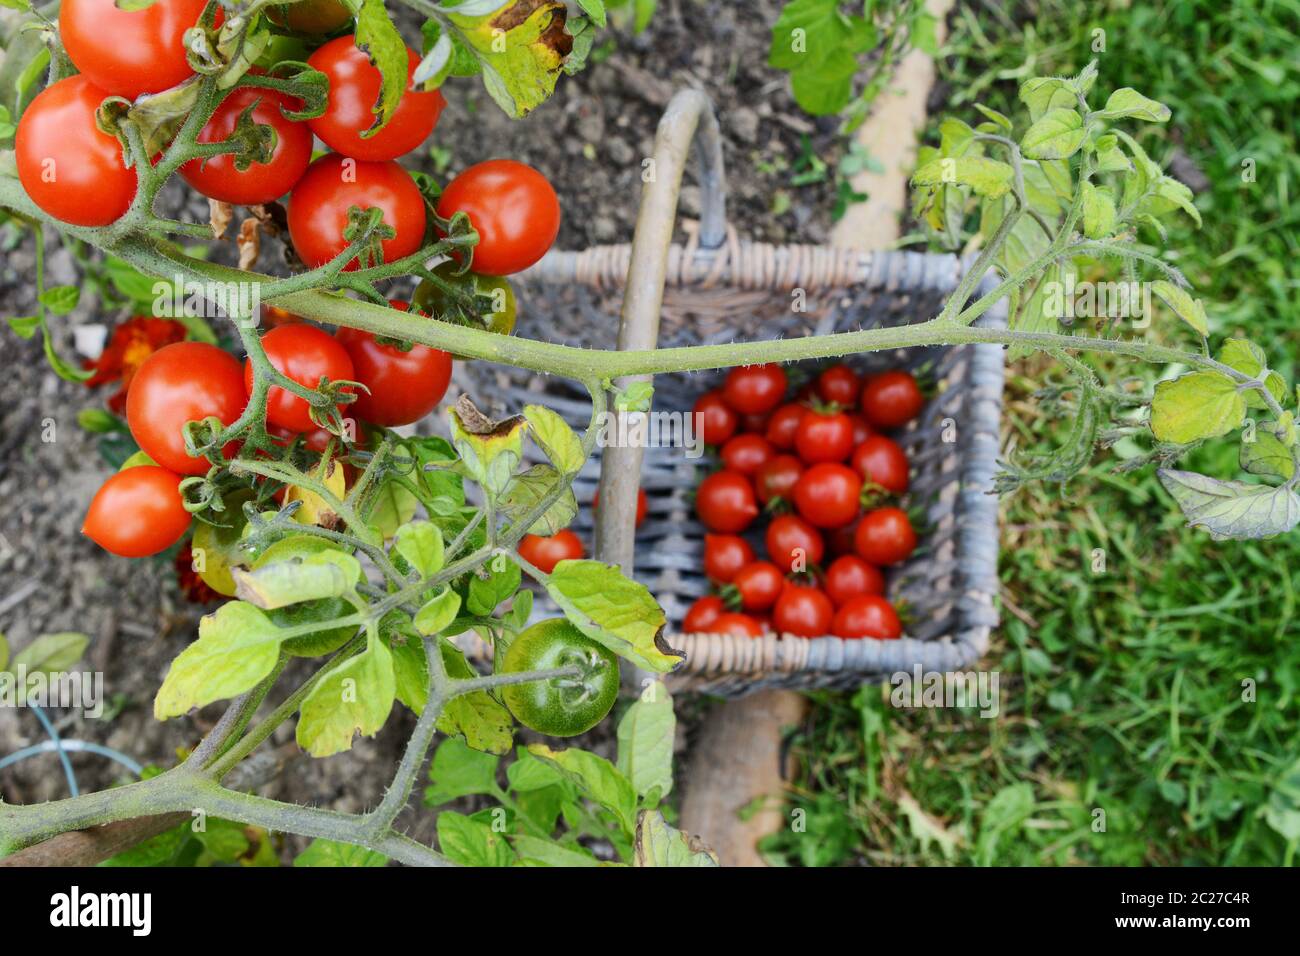 Red and green cherry tomatoes on the vine, in selective focus above a basket of picked fruit in a vegetable garden Stock Photo